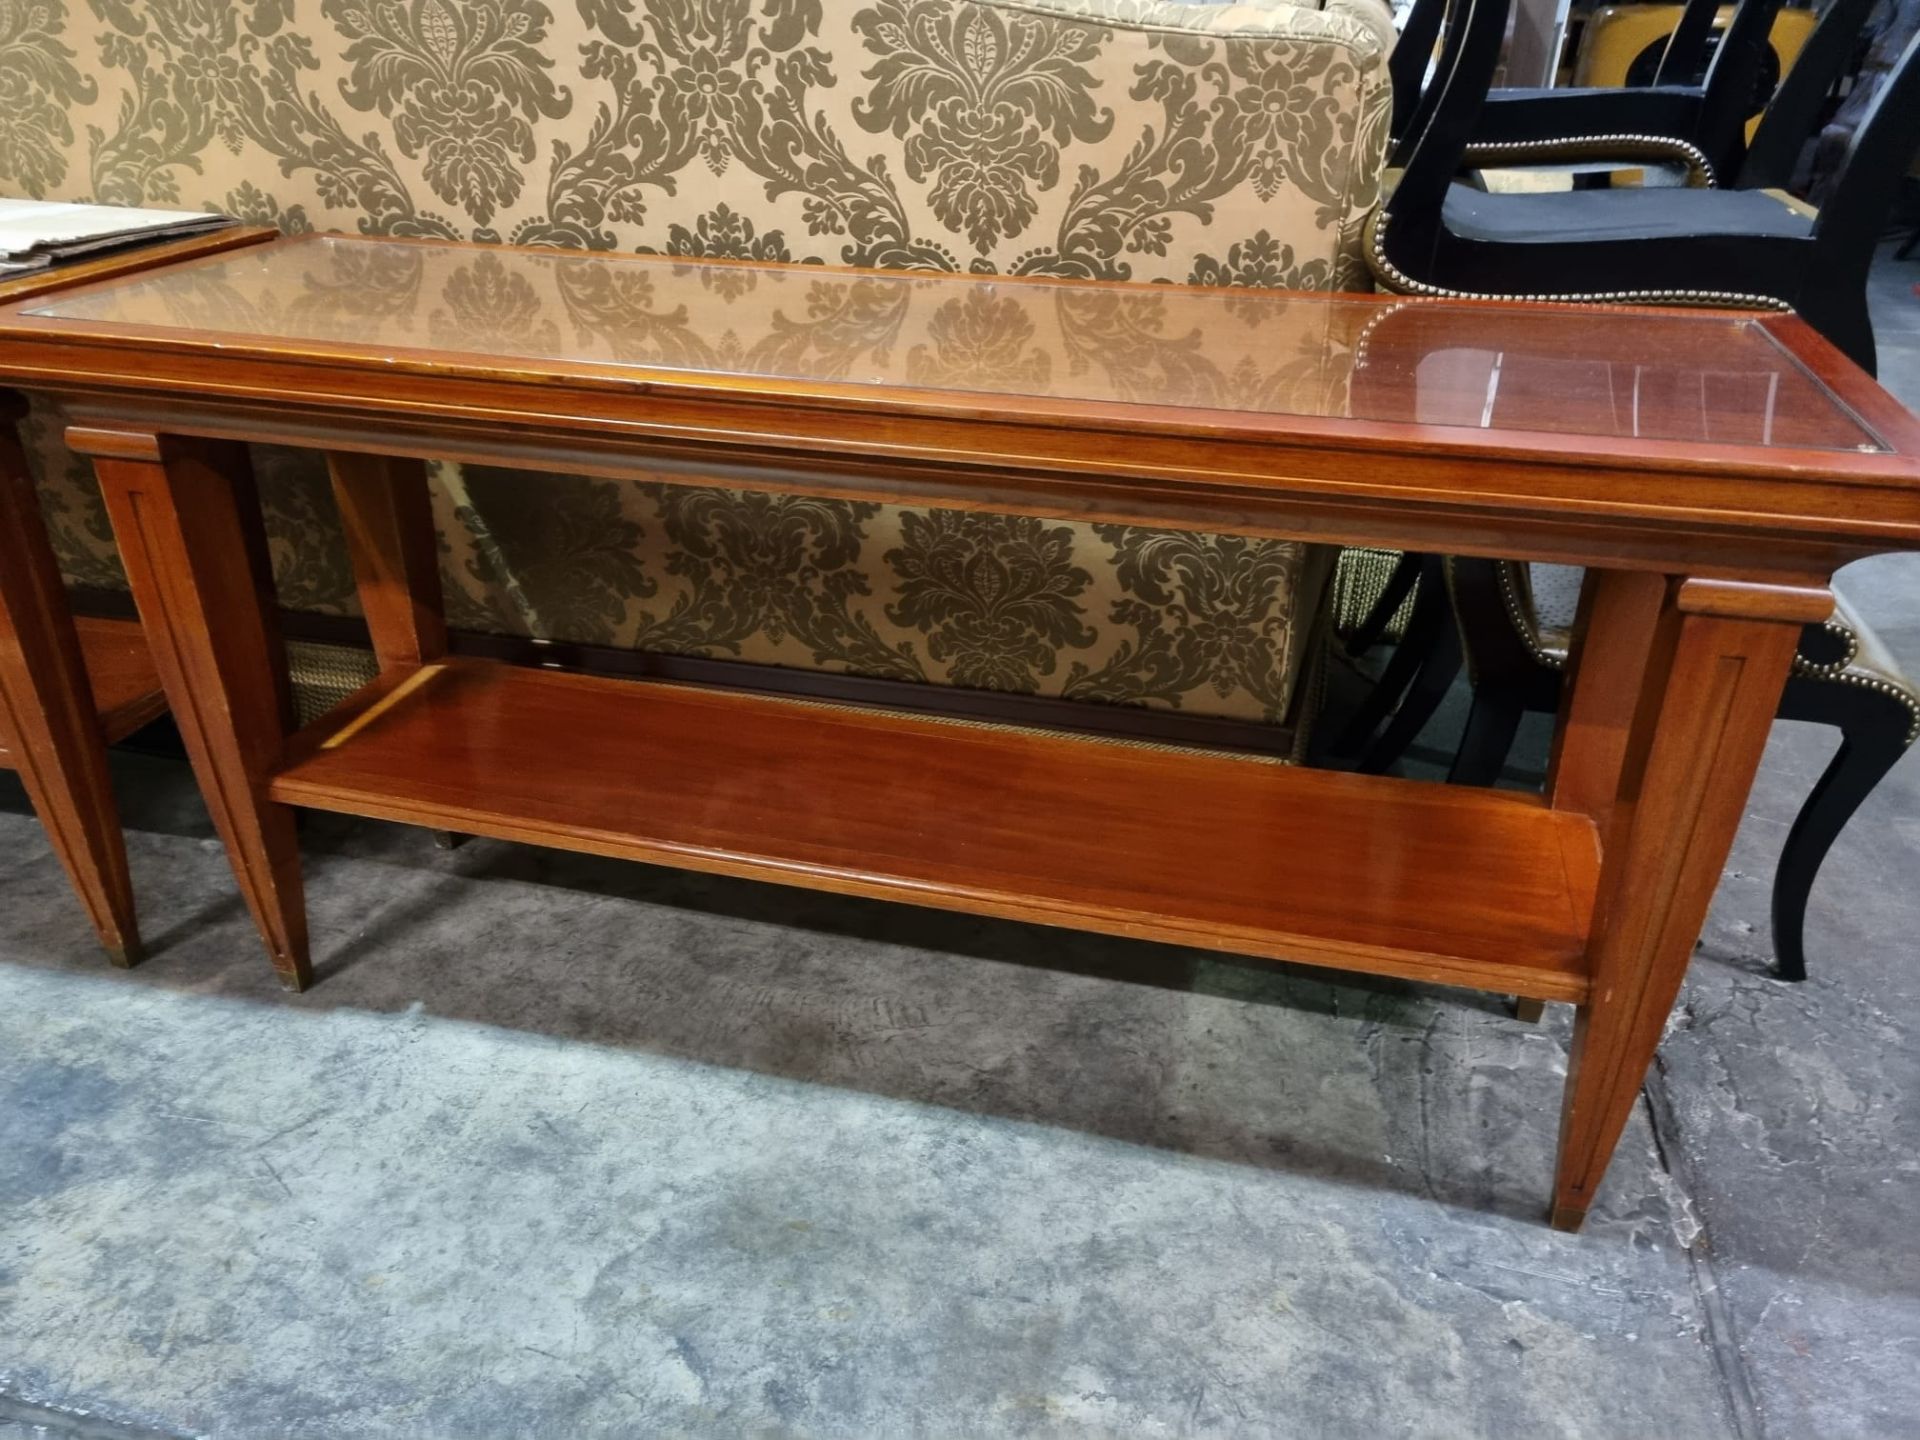 A Large Rosewood Console Or Hall Table With Lower Shelf The Top Inset With A Tempered Glass